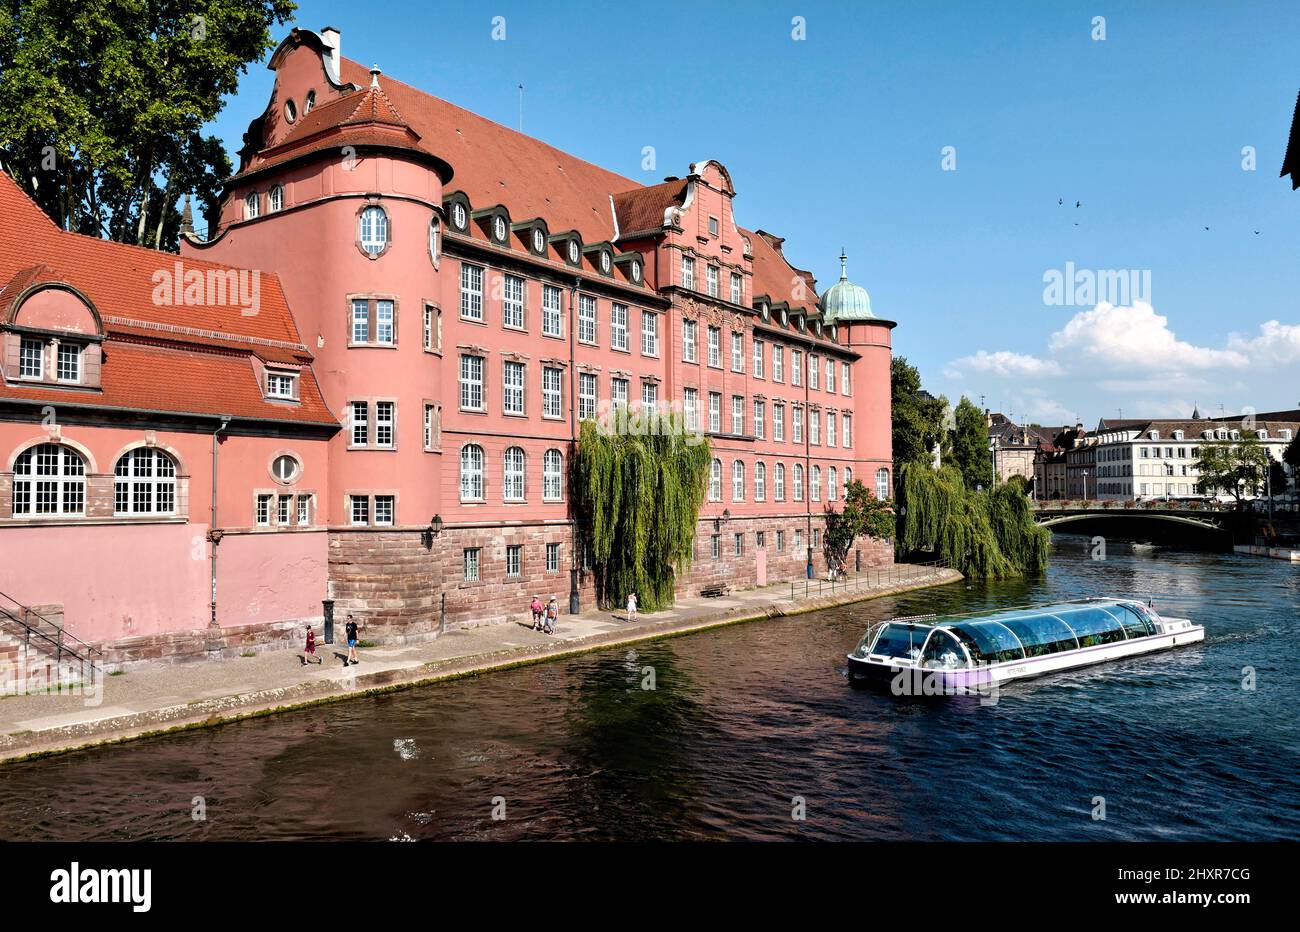 France, Strasbourg, the historic center, the Saint Thomas foundation and the banks of the Ill river. Stock Photo